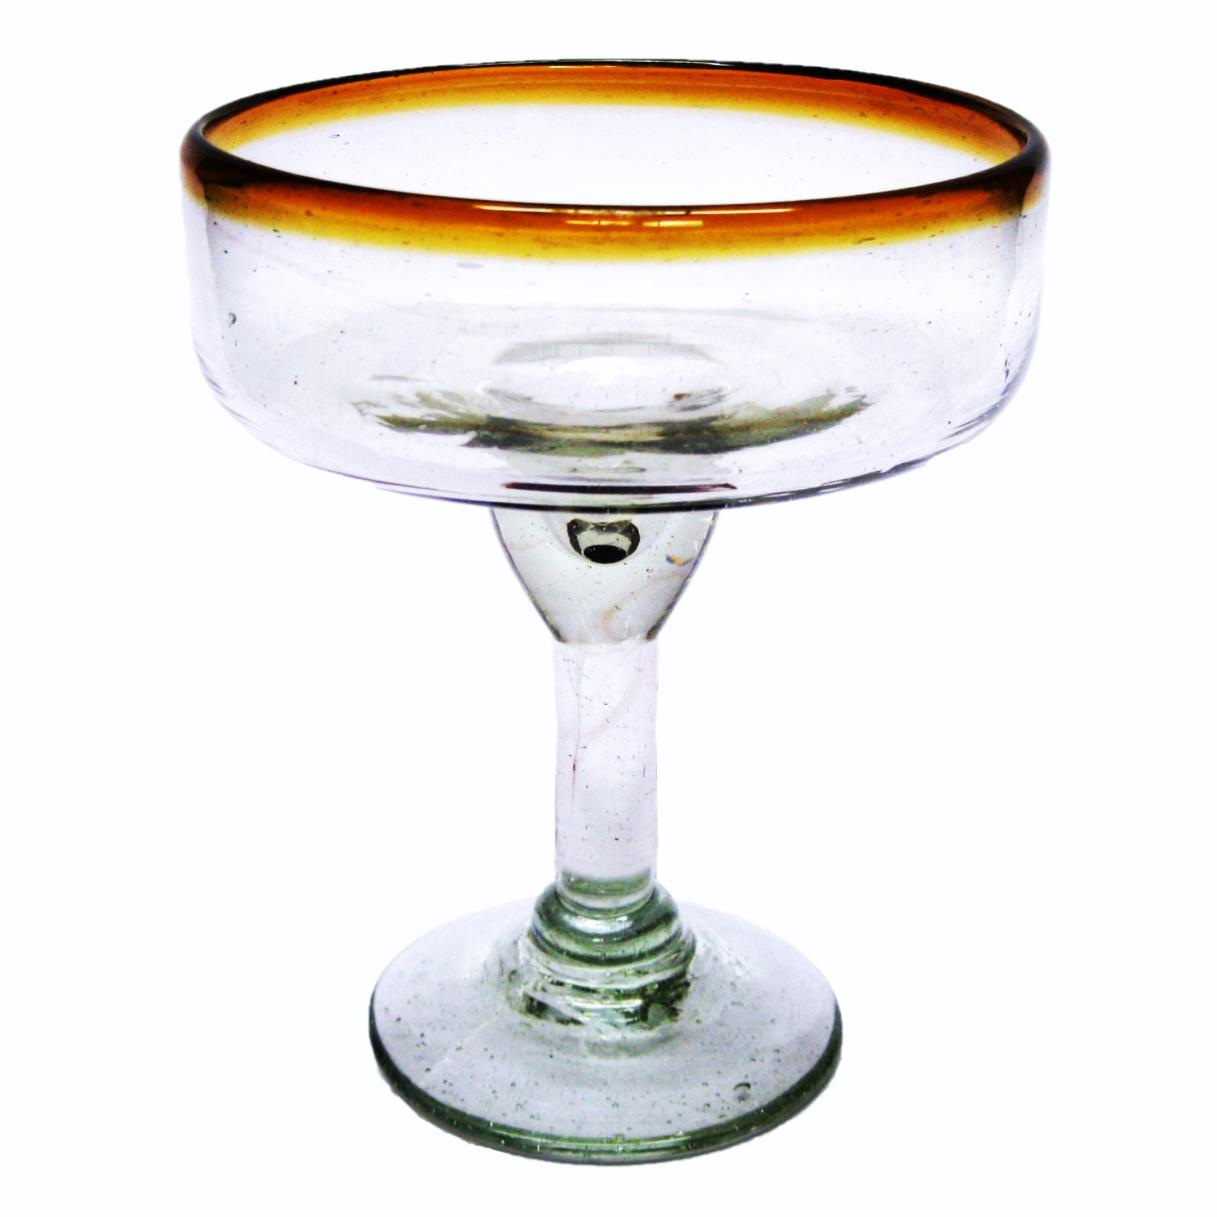 Wholesale MEXICAN GLASSWARE / Amber Rim 14 oz Large Margarita Glasses  / For the margarita lover, these enjoyable large sized margarita glasses feature a cheerful amber color rim.